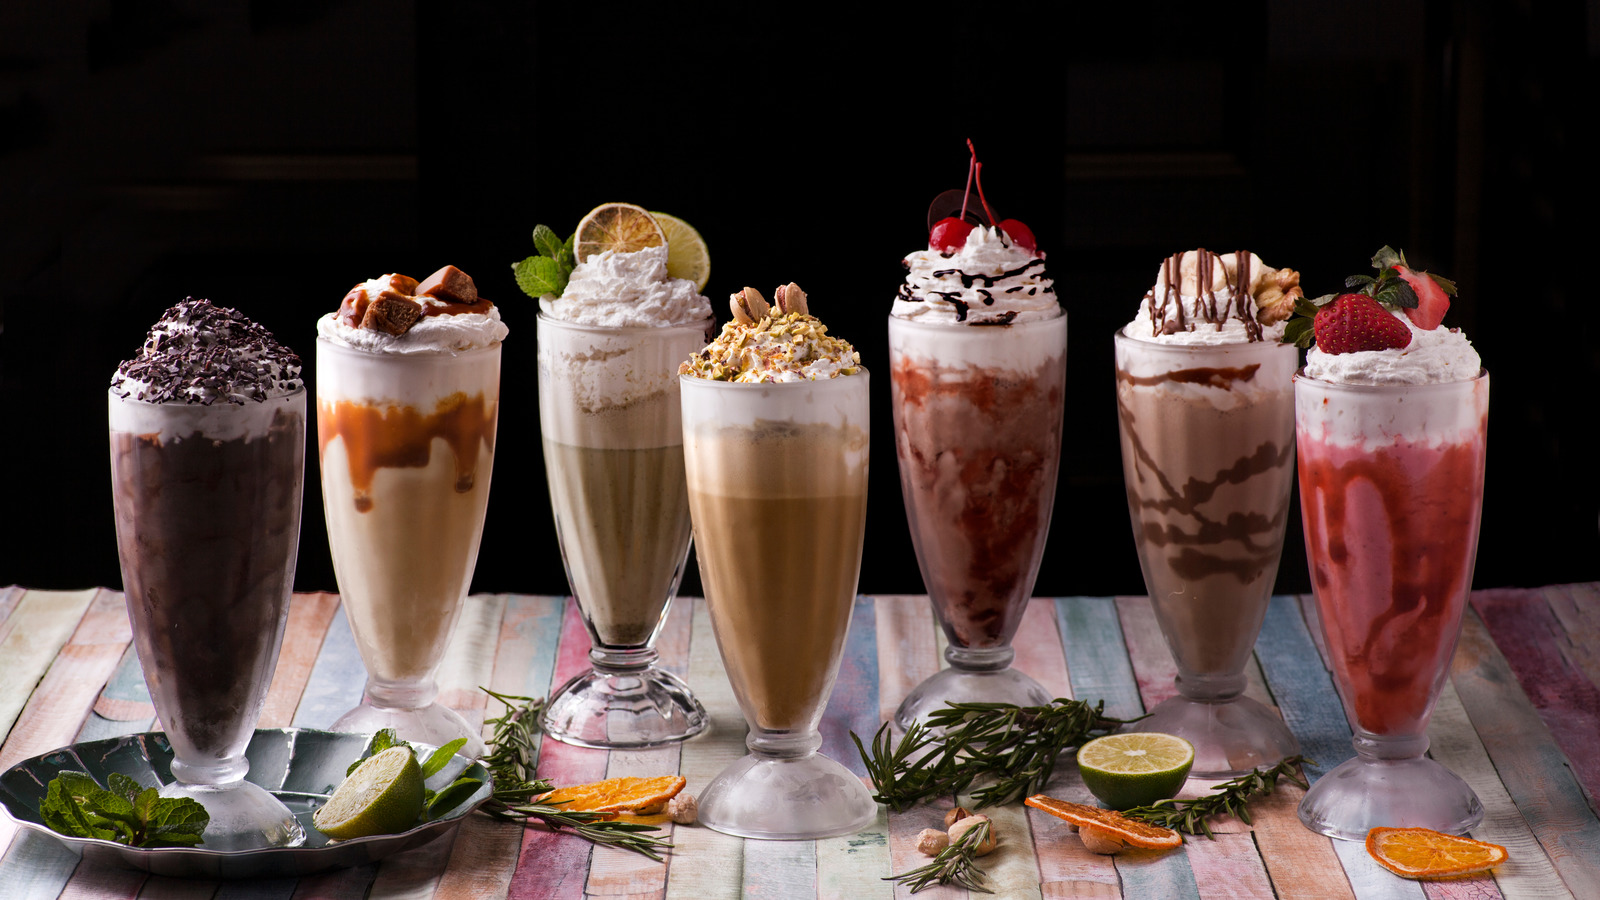 those milk shakes are flawless